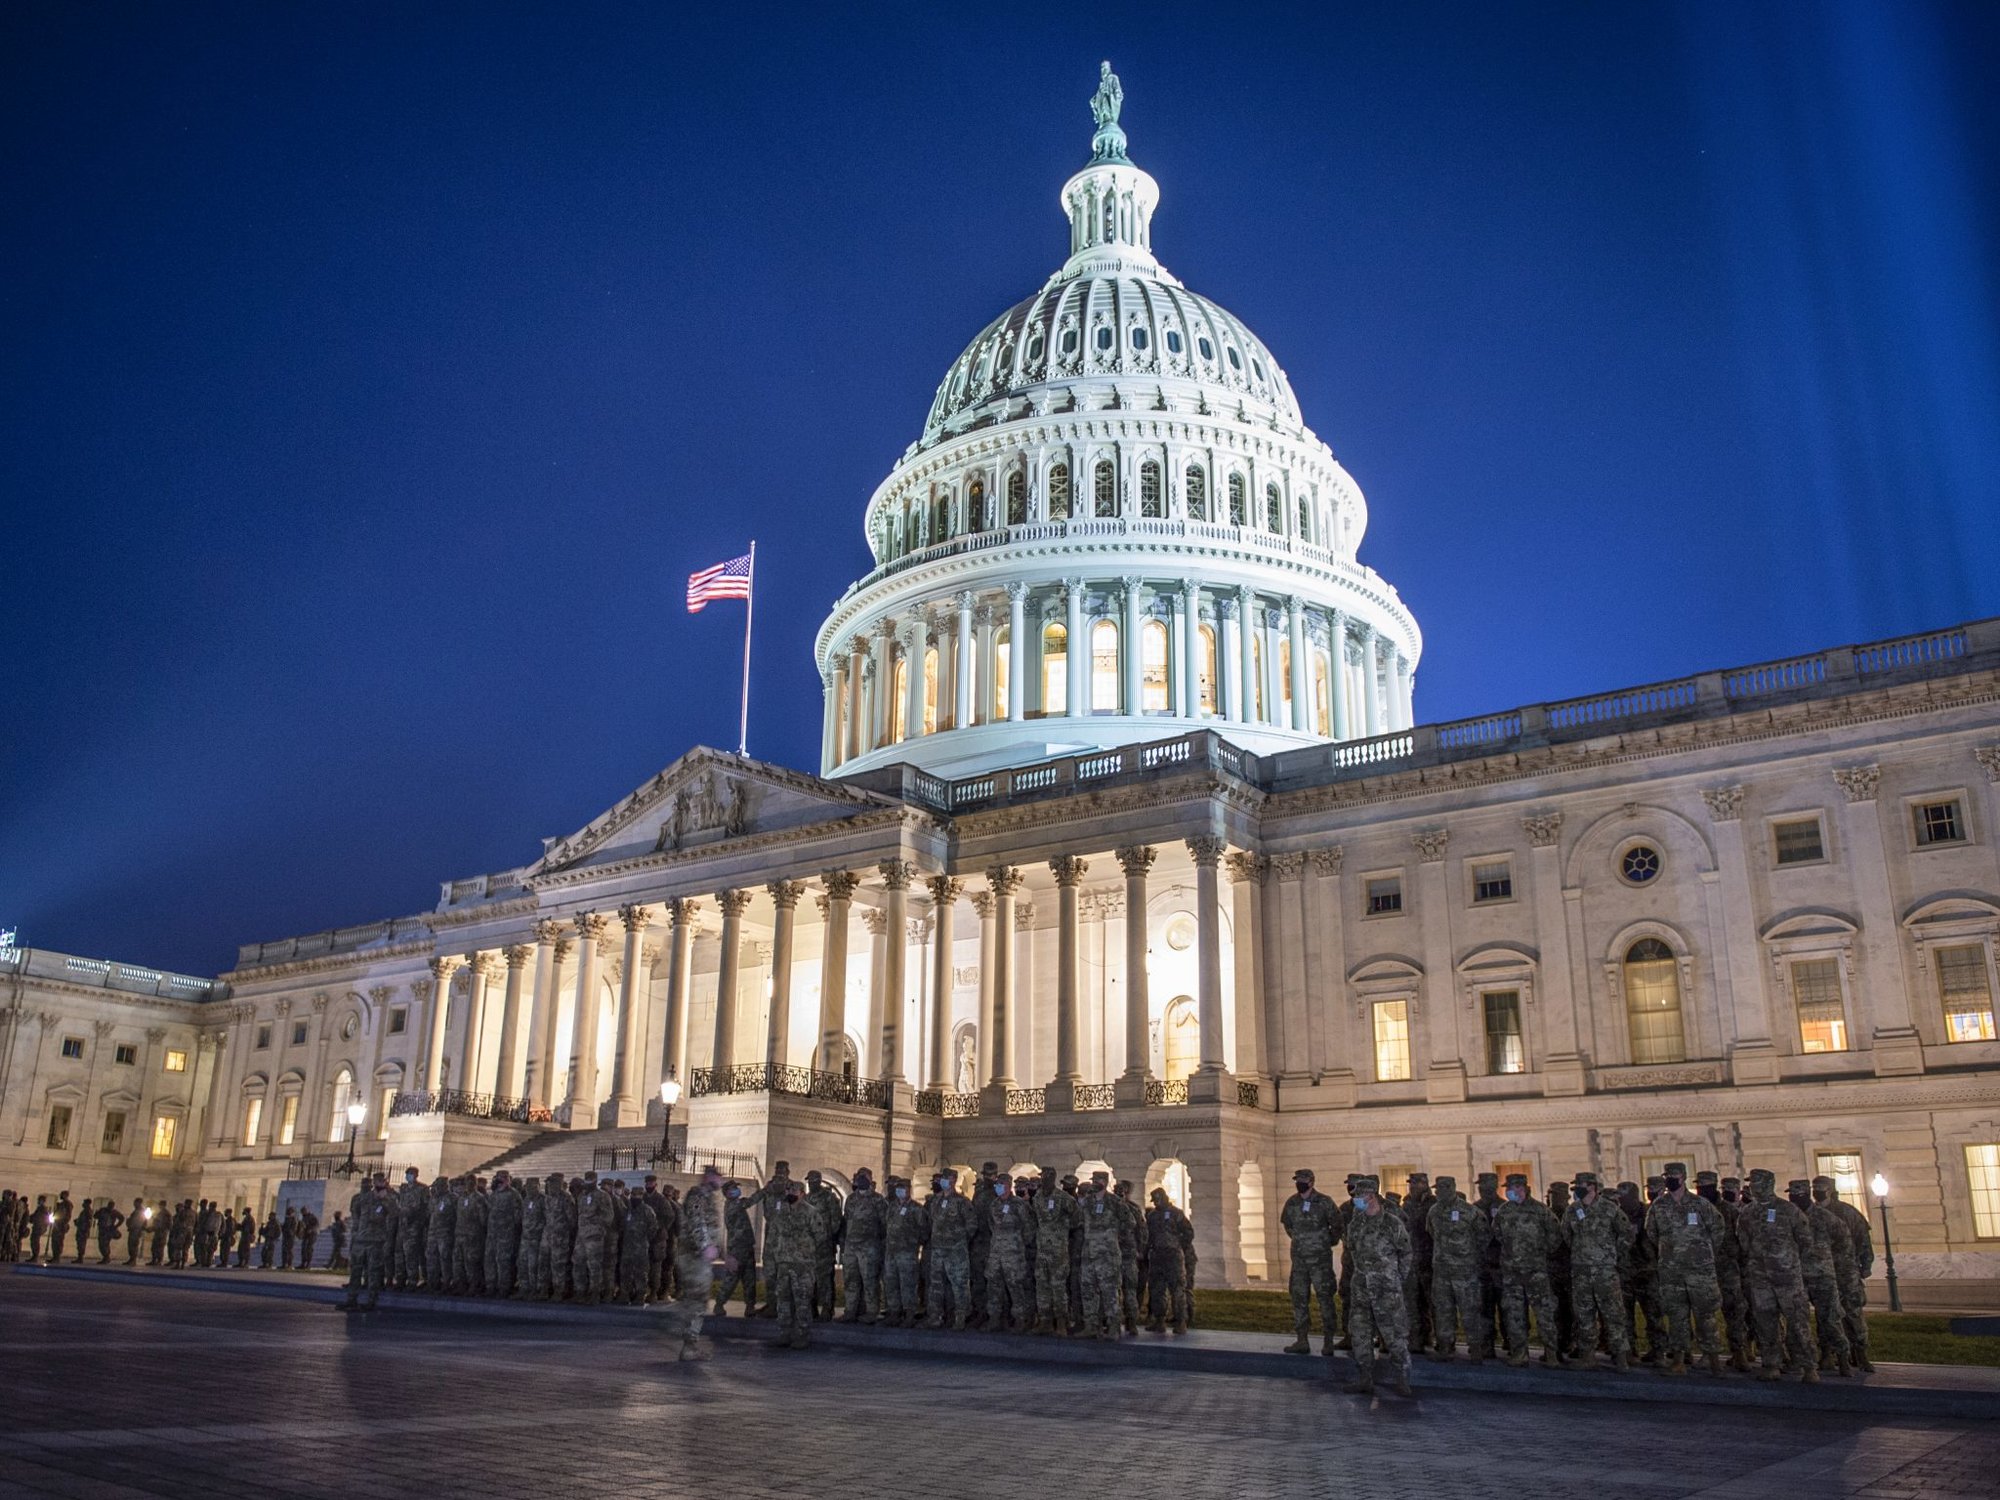 Soldiers with the Oklahoma National Guard stand in formation outside the US Capitol Building Jan. 20, 2021. US Army National Guard photo by Sgt. Anthony Jones.